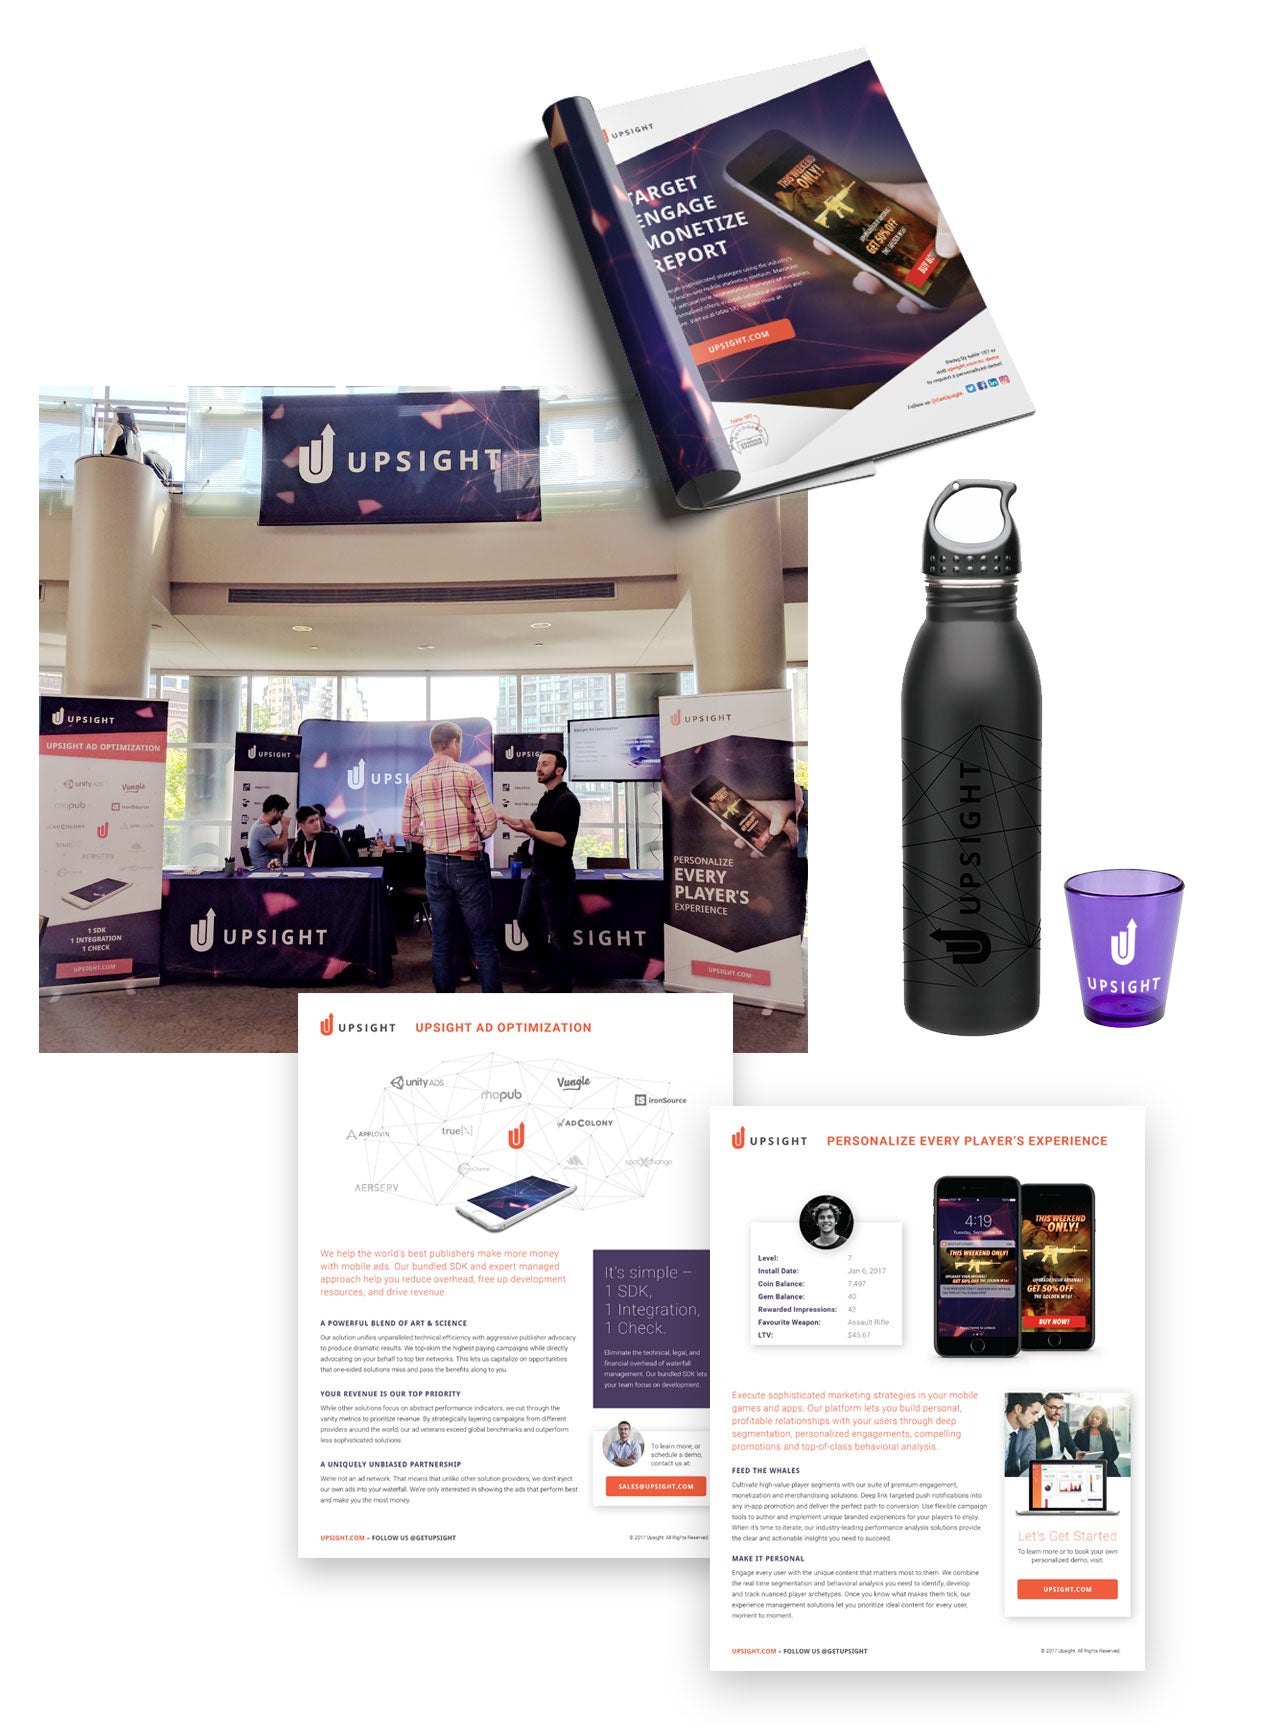 Brand and marketing materials for Upsight